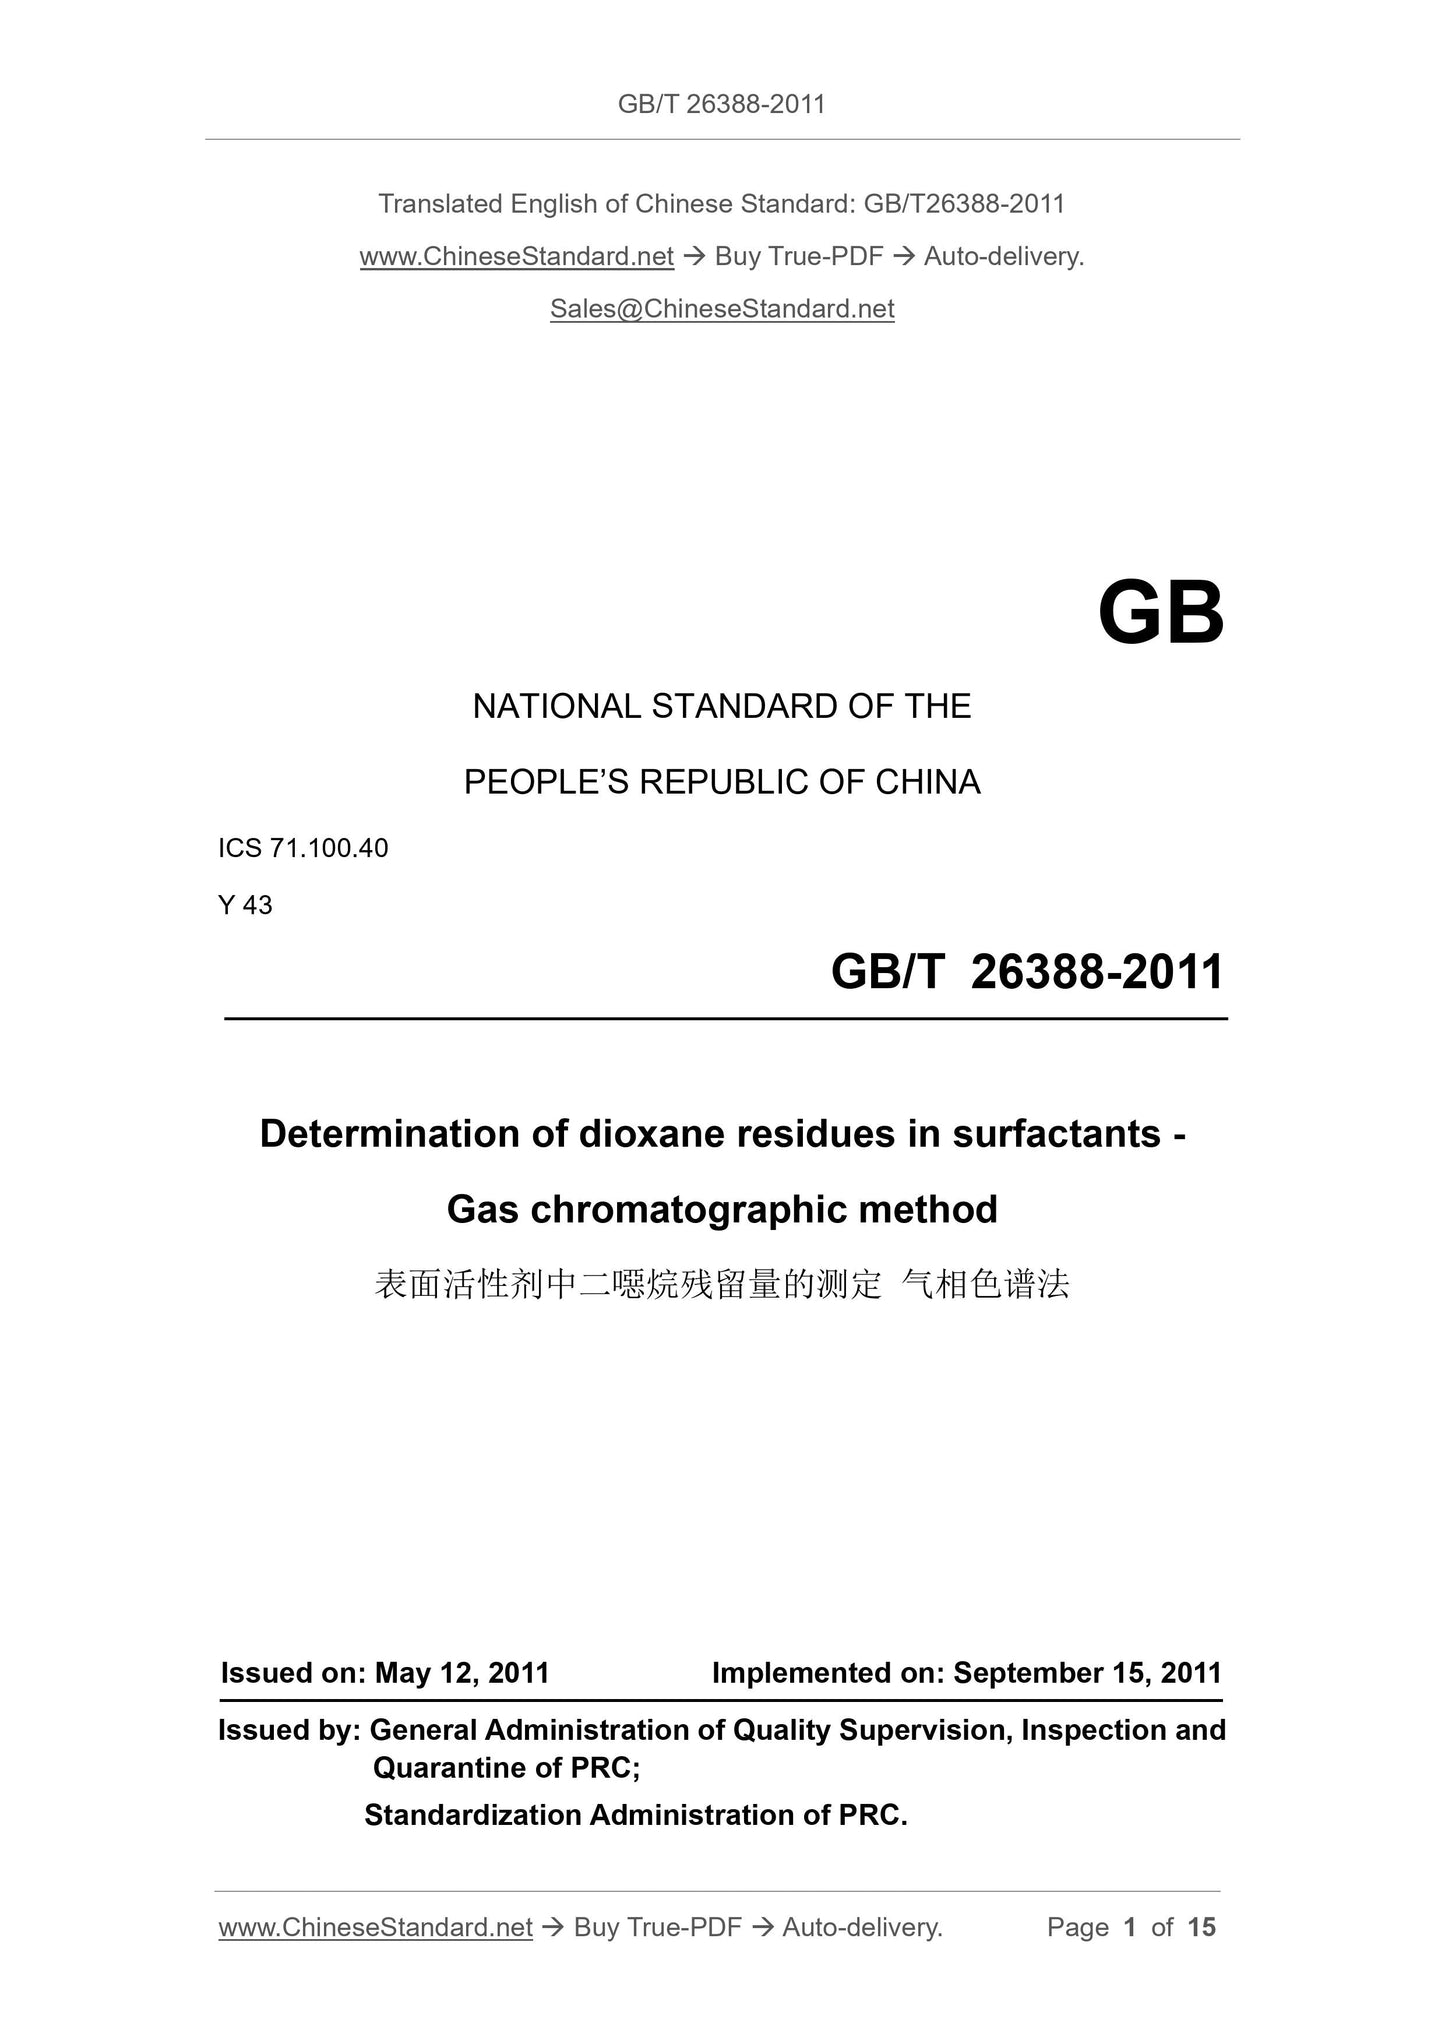 GB/T 26388-2011 Page 1